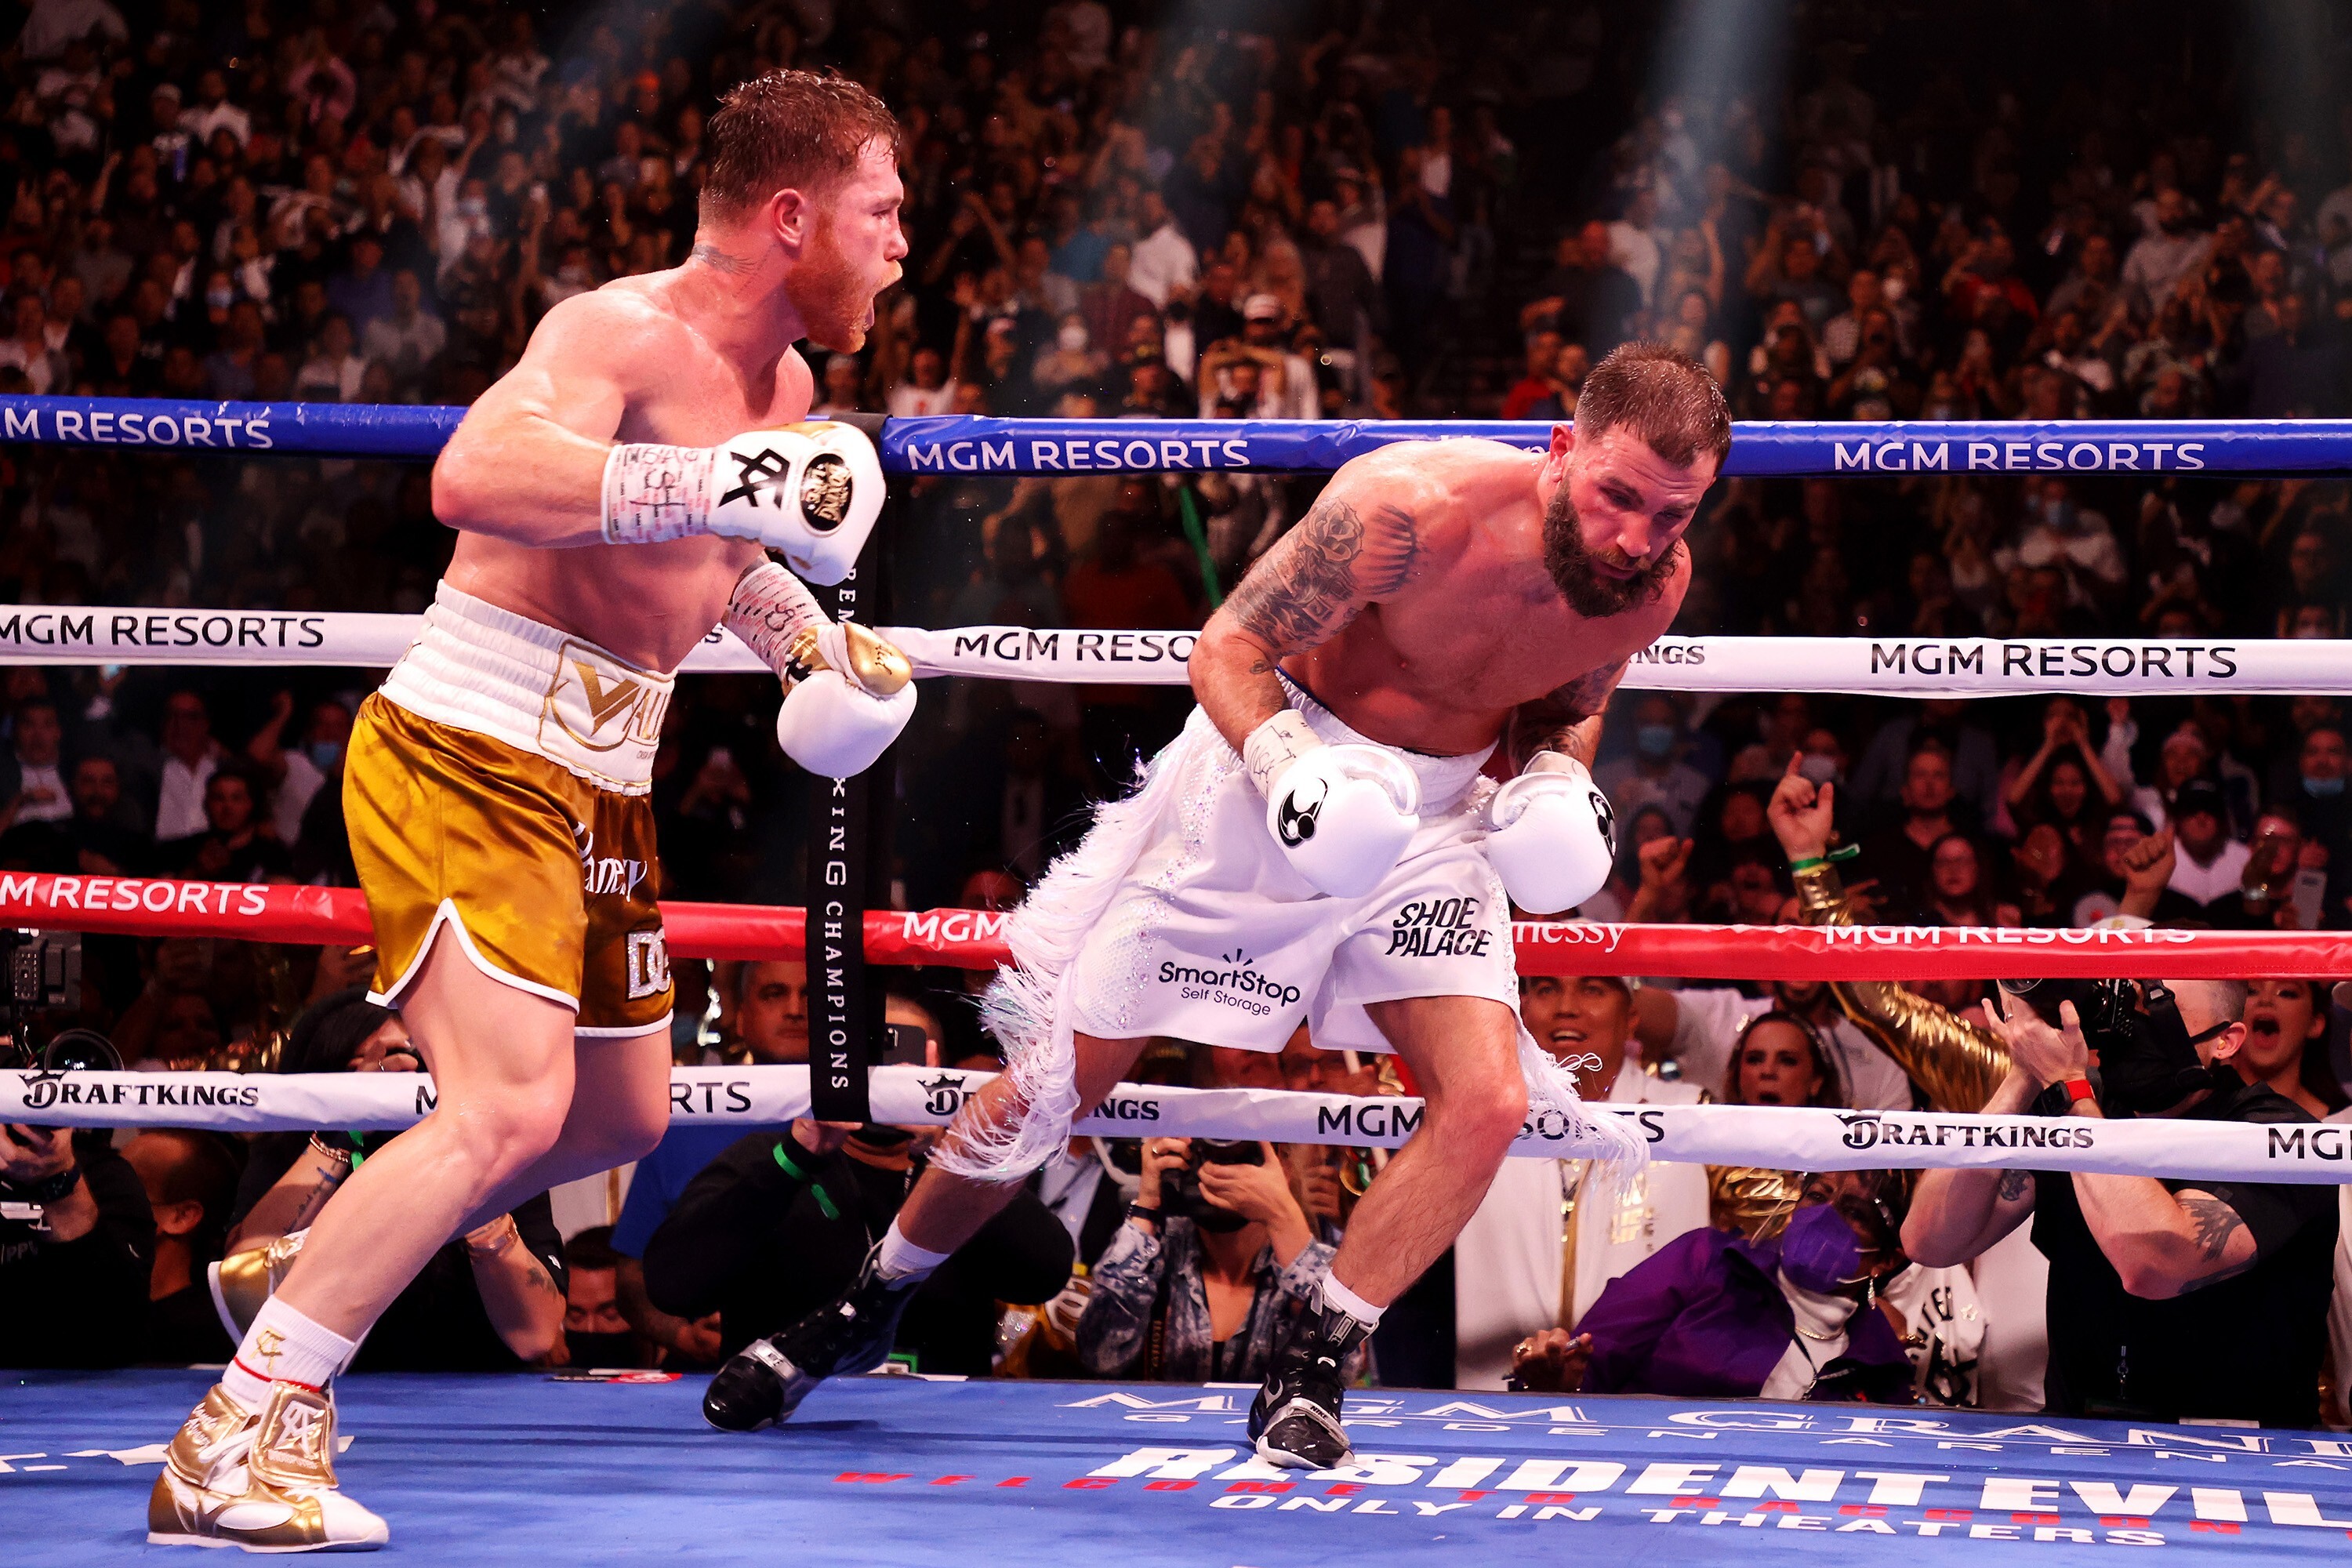 Canelo Alvarez punches Caleb Plant against the ropes during their championship bout. Photo: TNS